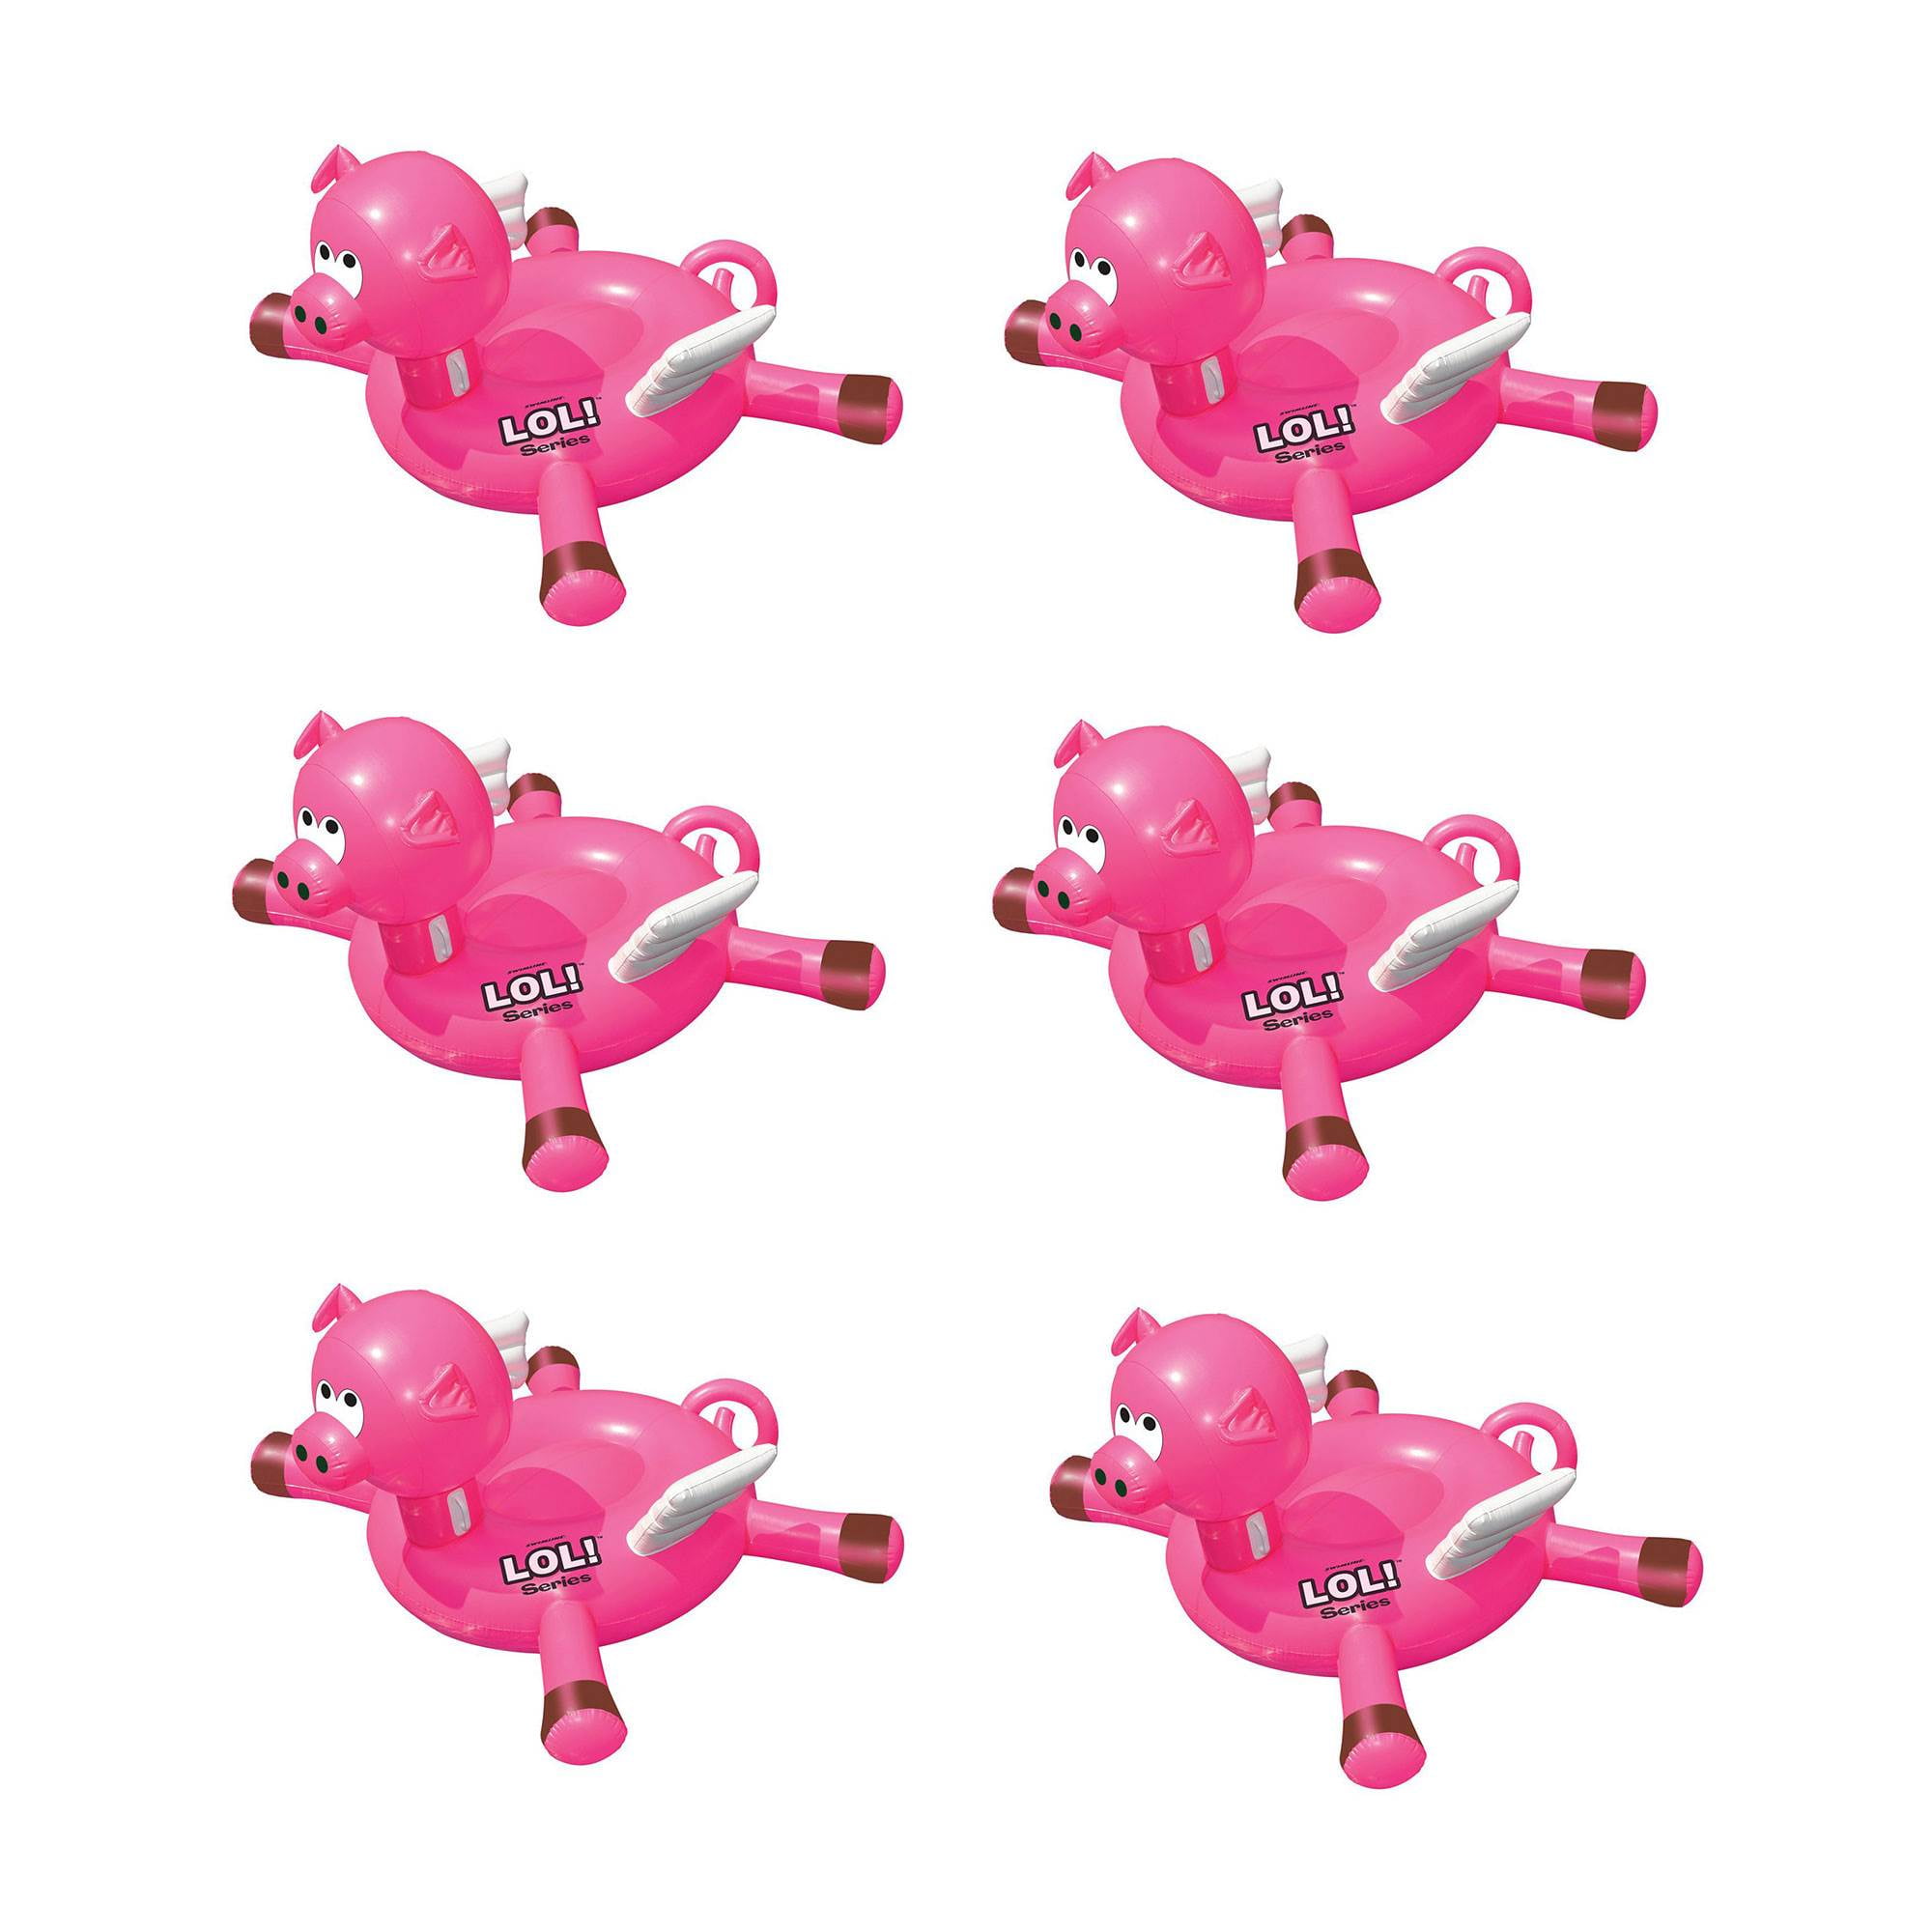 Series Giant Inflatable Ride-On Flying Pig Pool Float Used Details about   Swimline LOL 